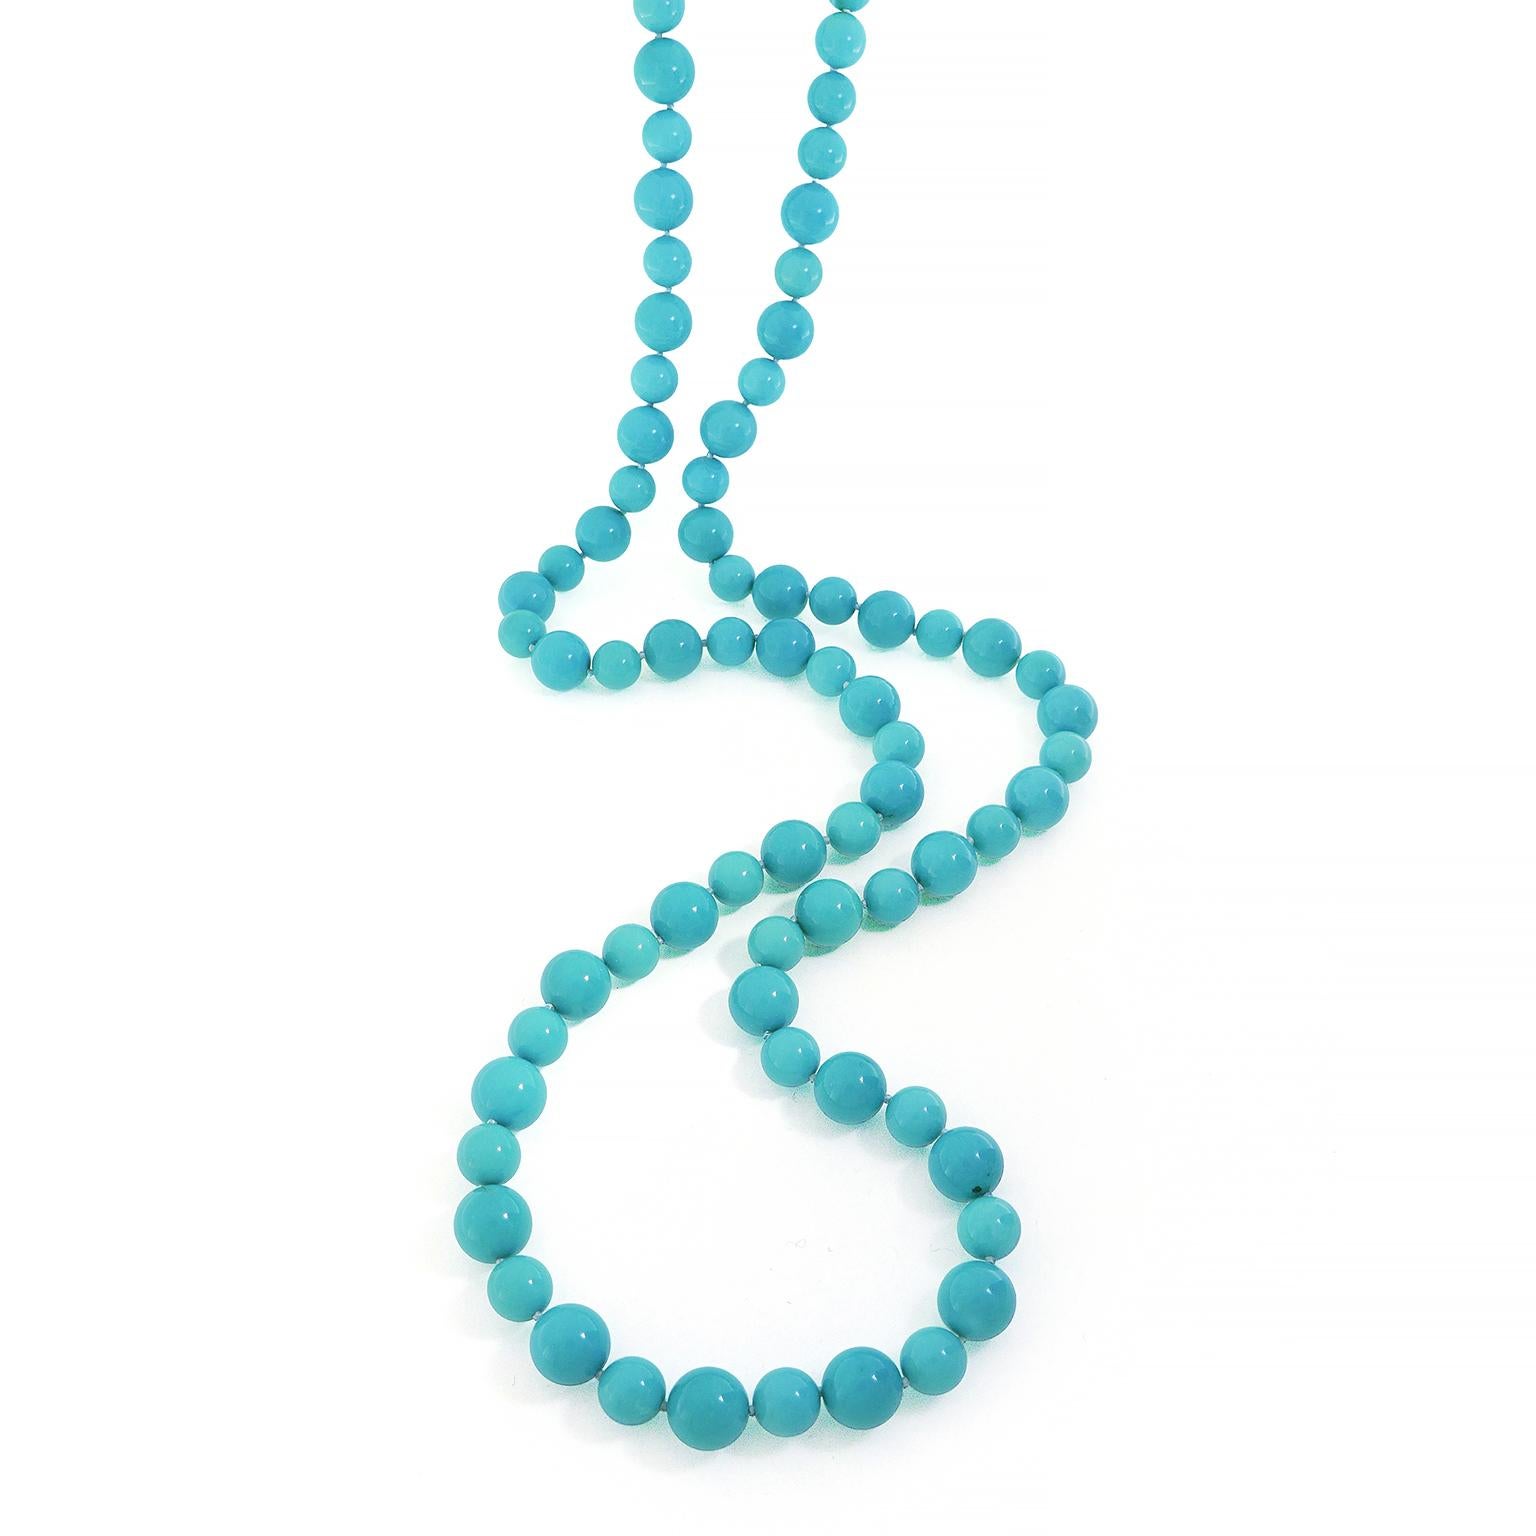 The prized beauty of turquoise embodies this necklace. Larger and smaller spheres of the Caribbean blue hued gem alternate in a pattern, while showcasing subtle variations in color. The total weight of the turquoise is 729.02 carats. An 18k yellow